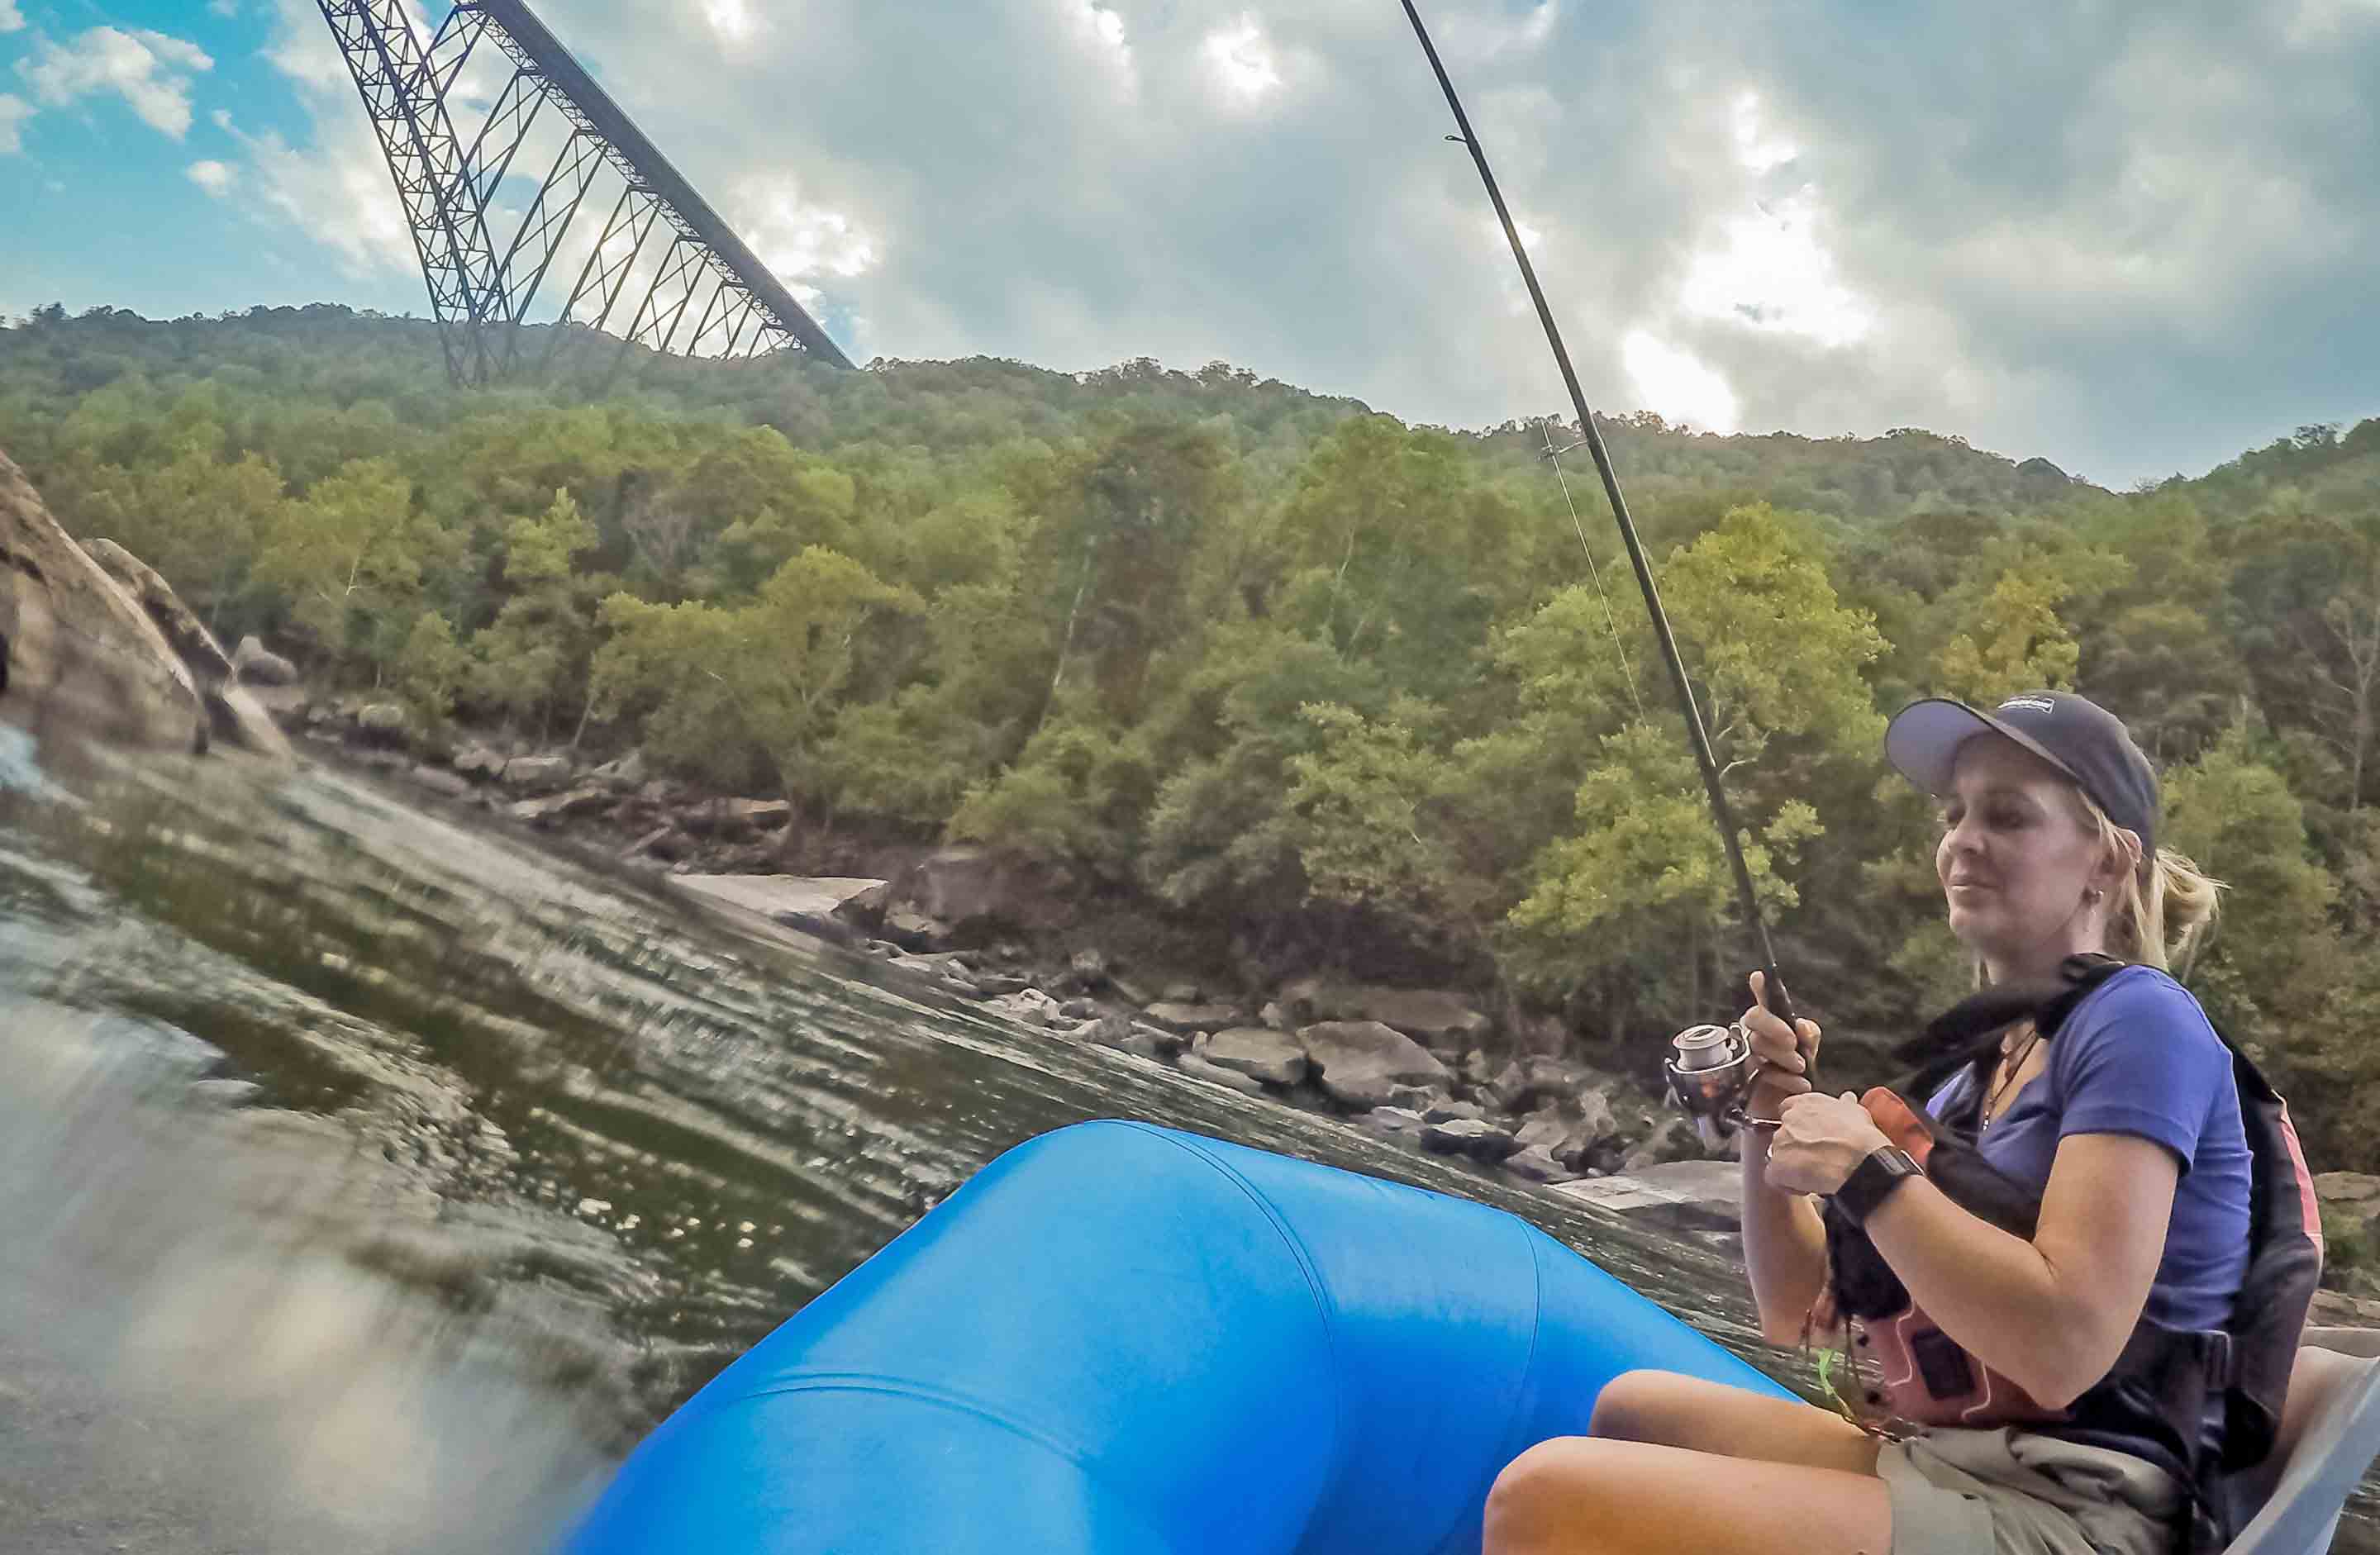 A woman reels in a fish while fishing on a guided tour with ACE Adventure Resort under the New River Gorge Bridge.